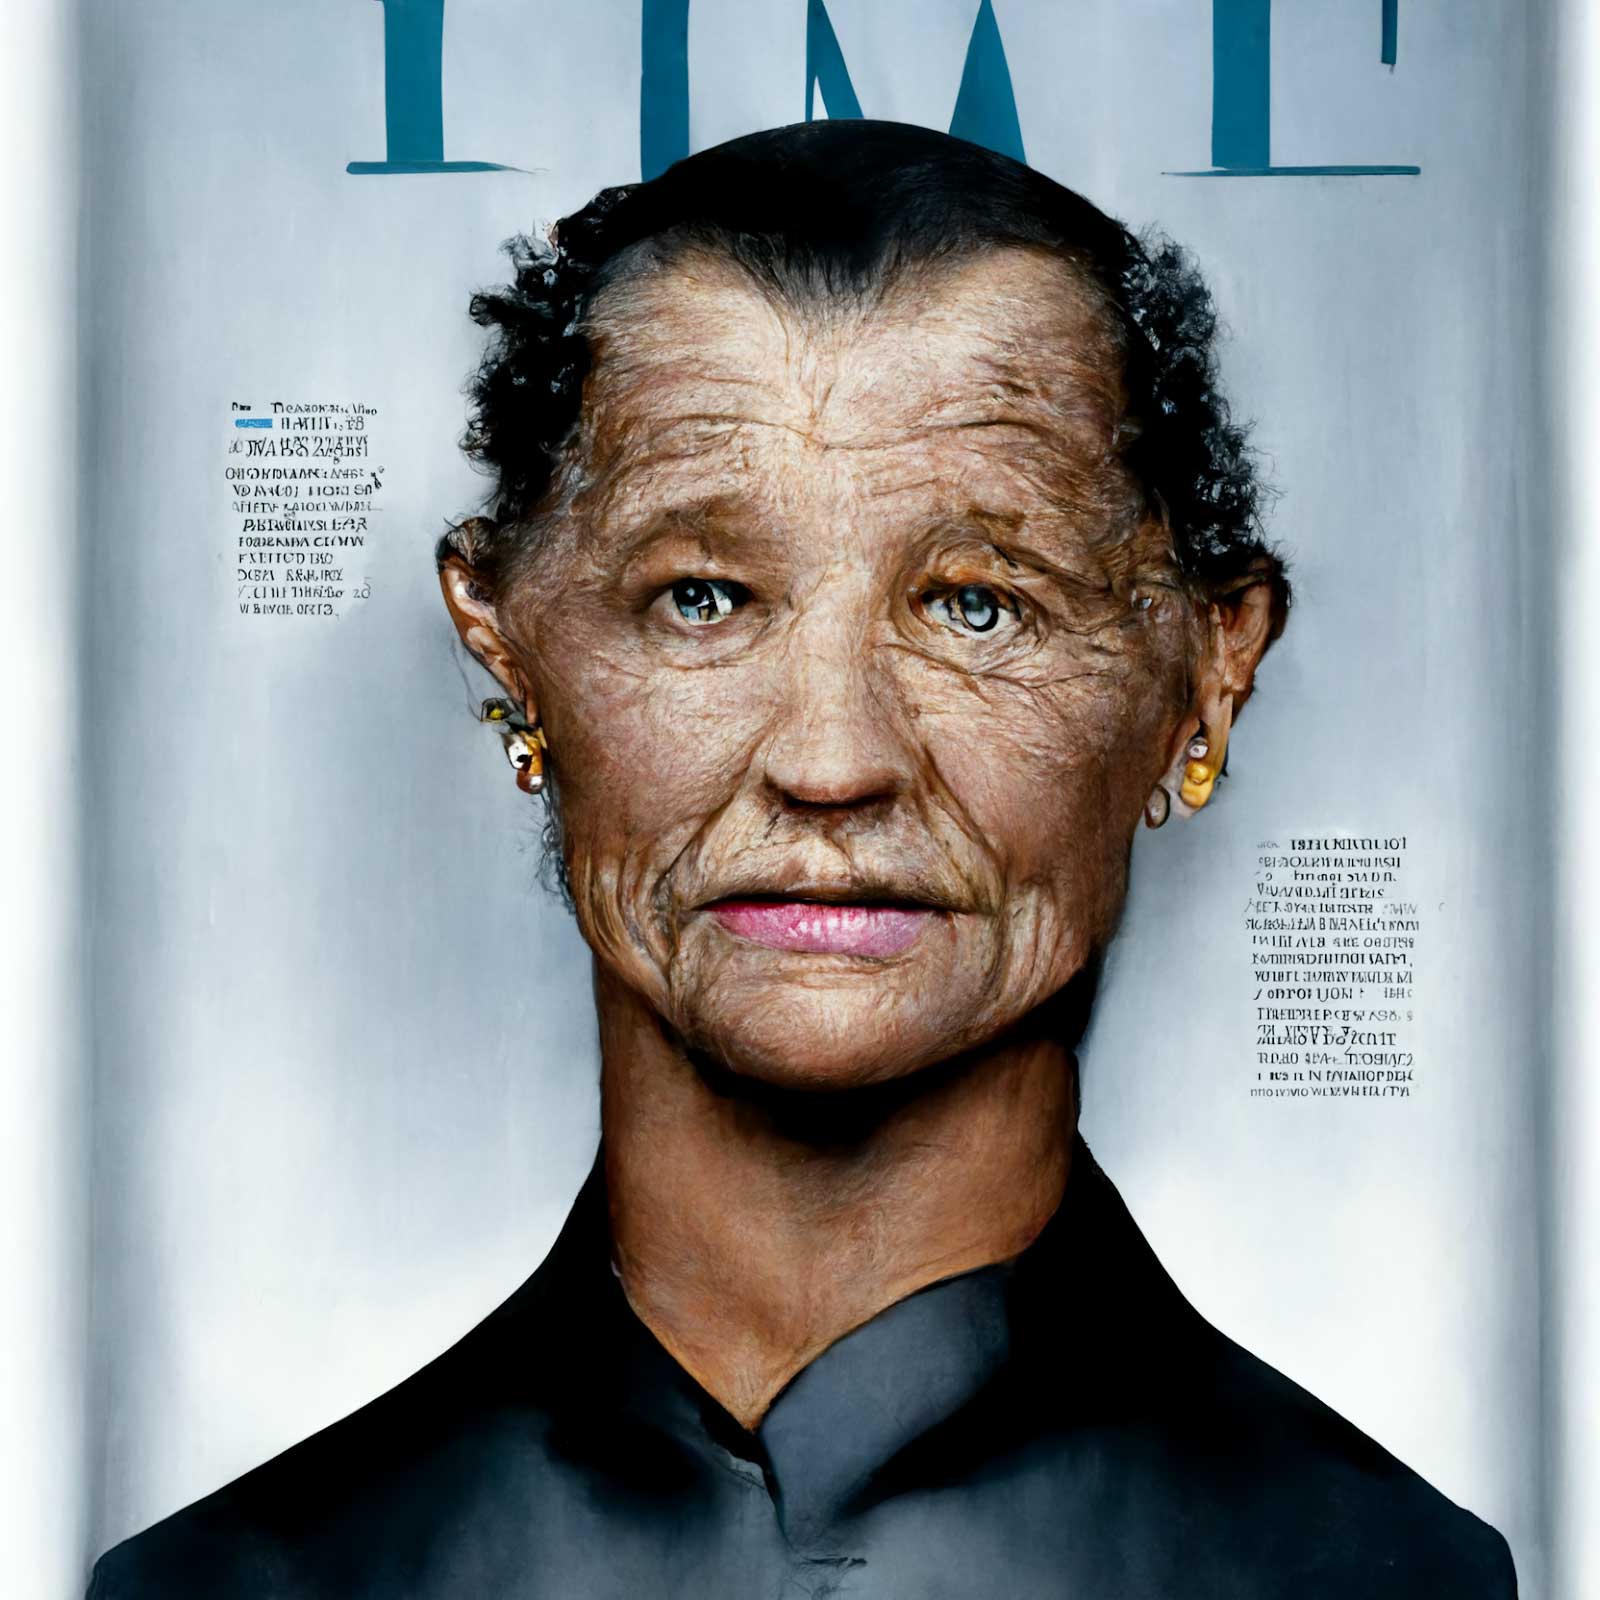 Time Magazine's 2050 Person of the Year Photo by Martin Schoeller. - Midjourney